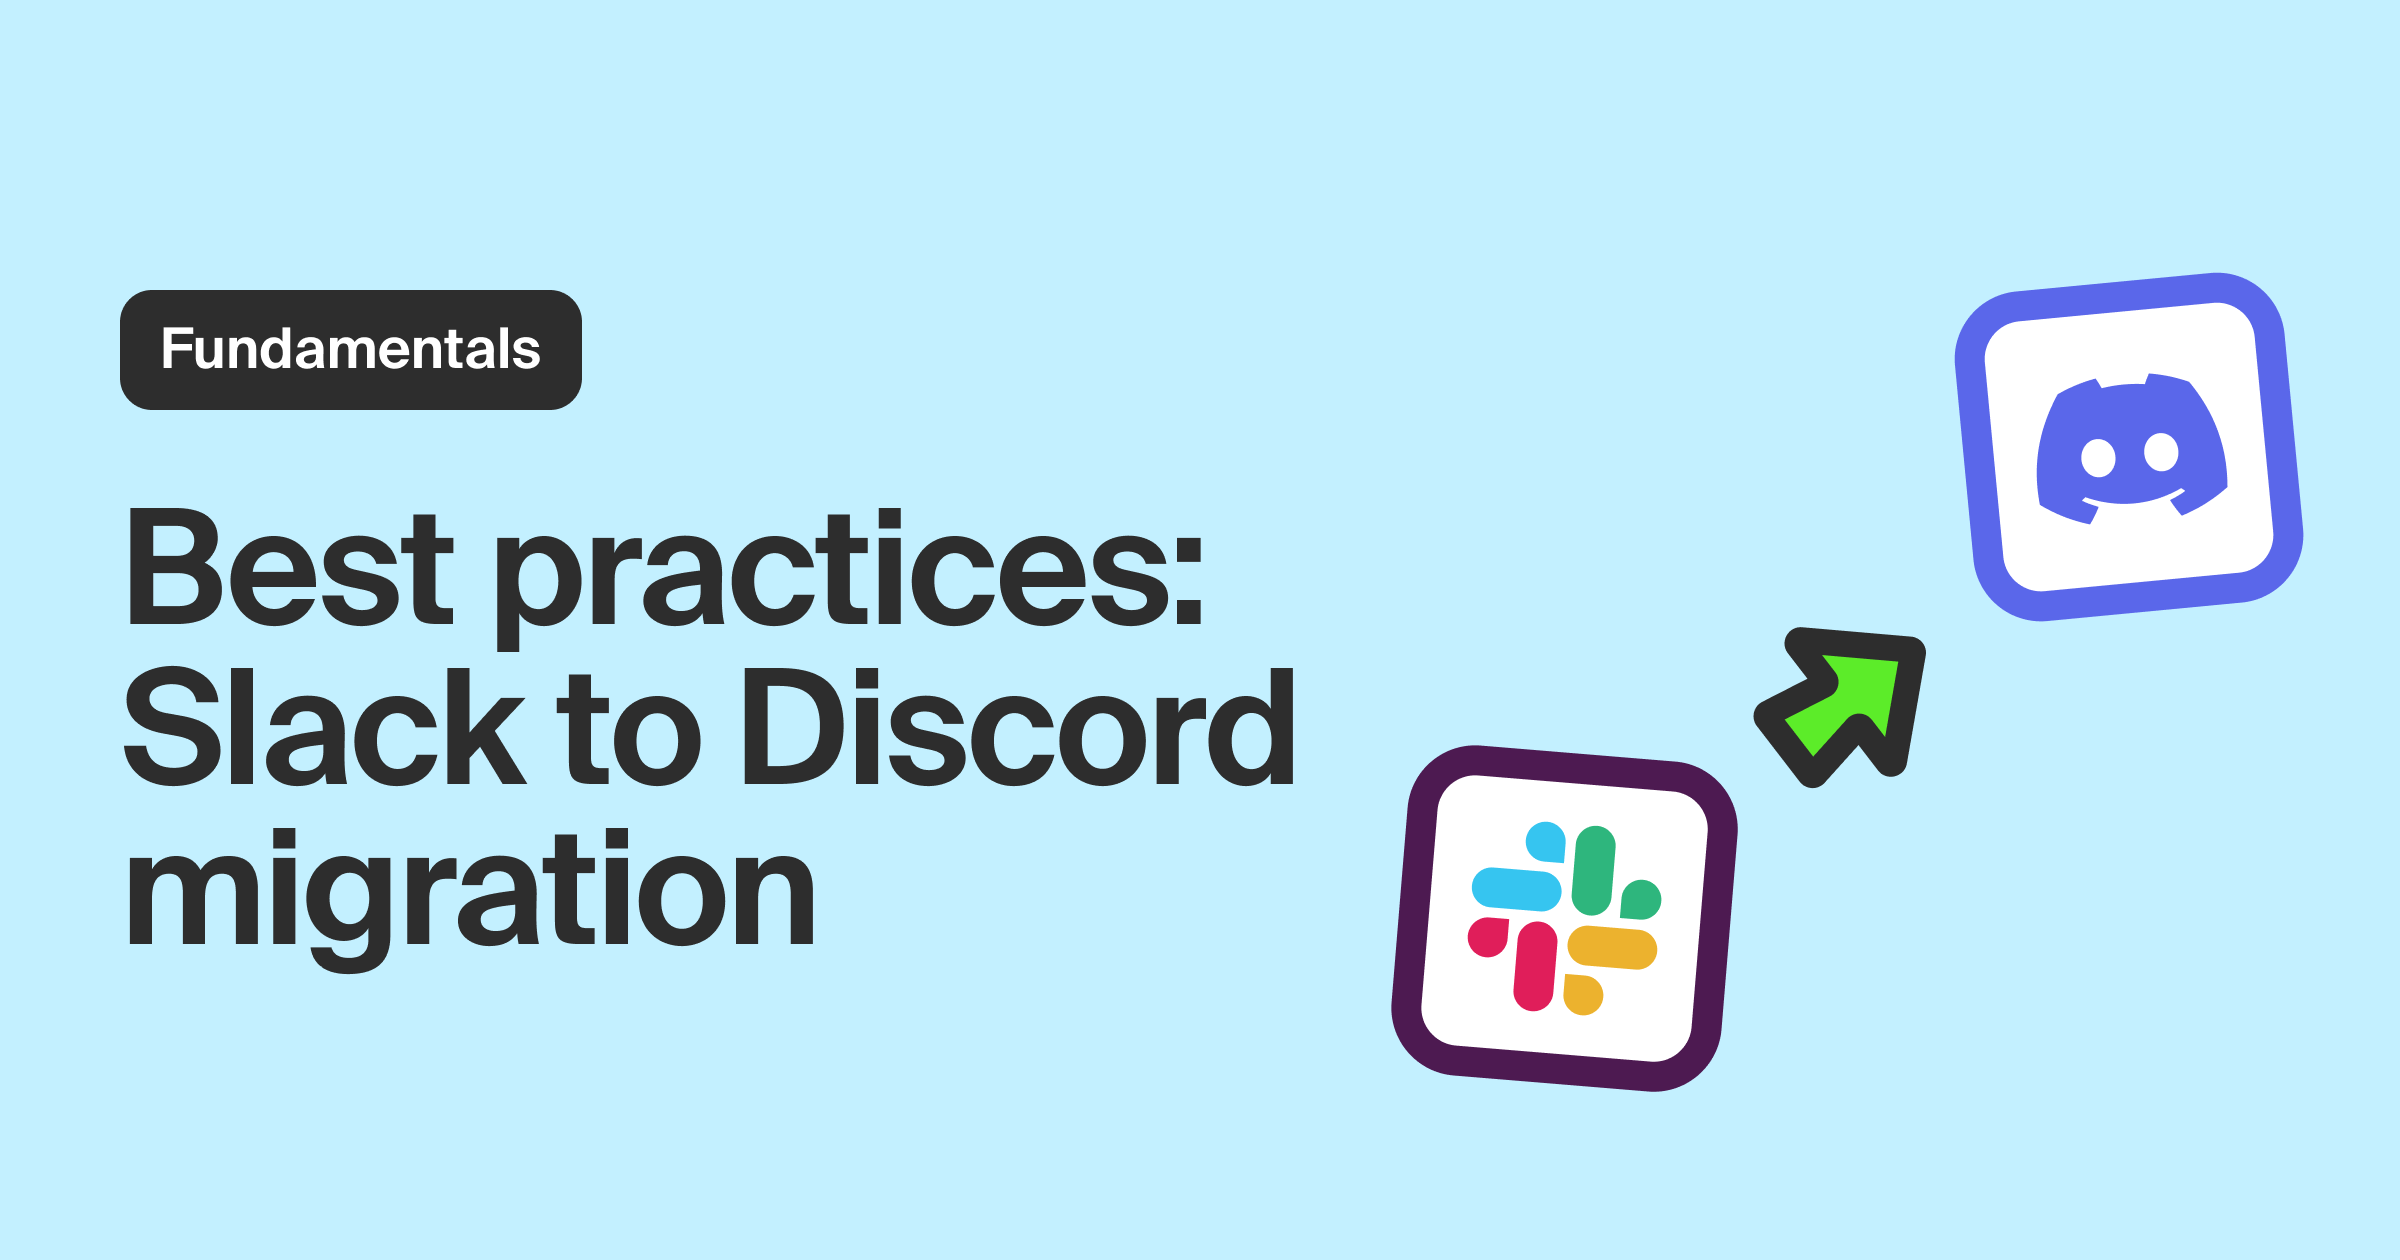 Discord as a Community: Tips & Resources — Multitude